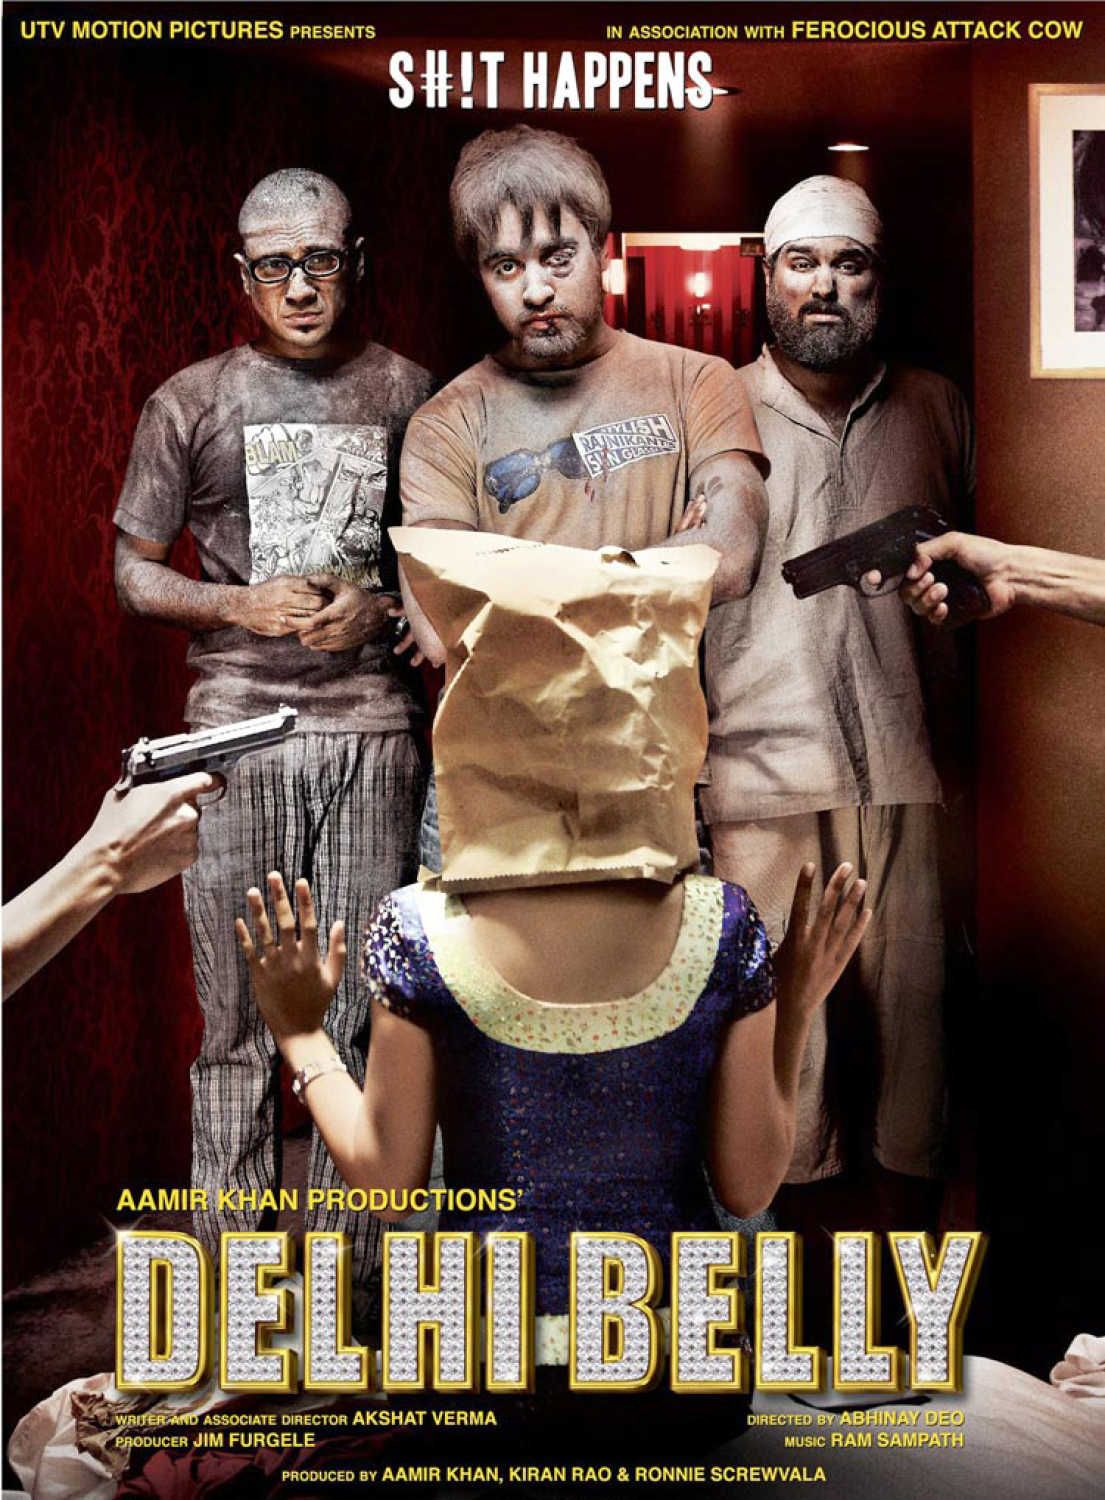 10 Years of Delhi Belly: Director Abhinay Deo says using orange juice for the film wasn't the original plan- EXCLUSIVE